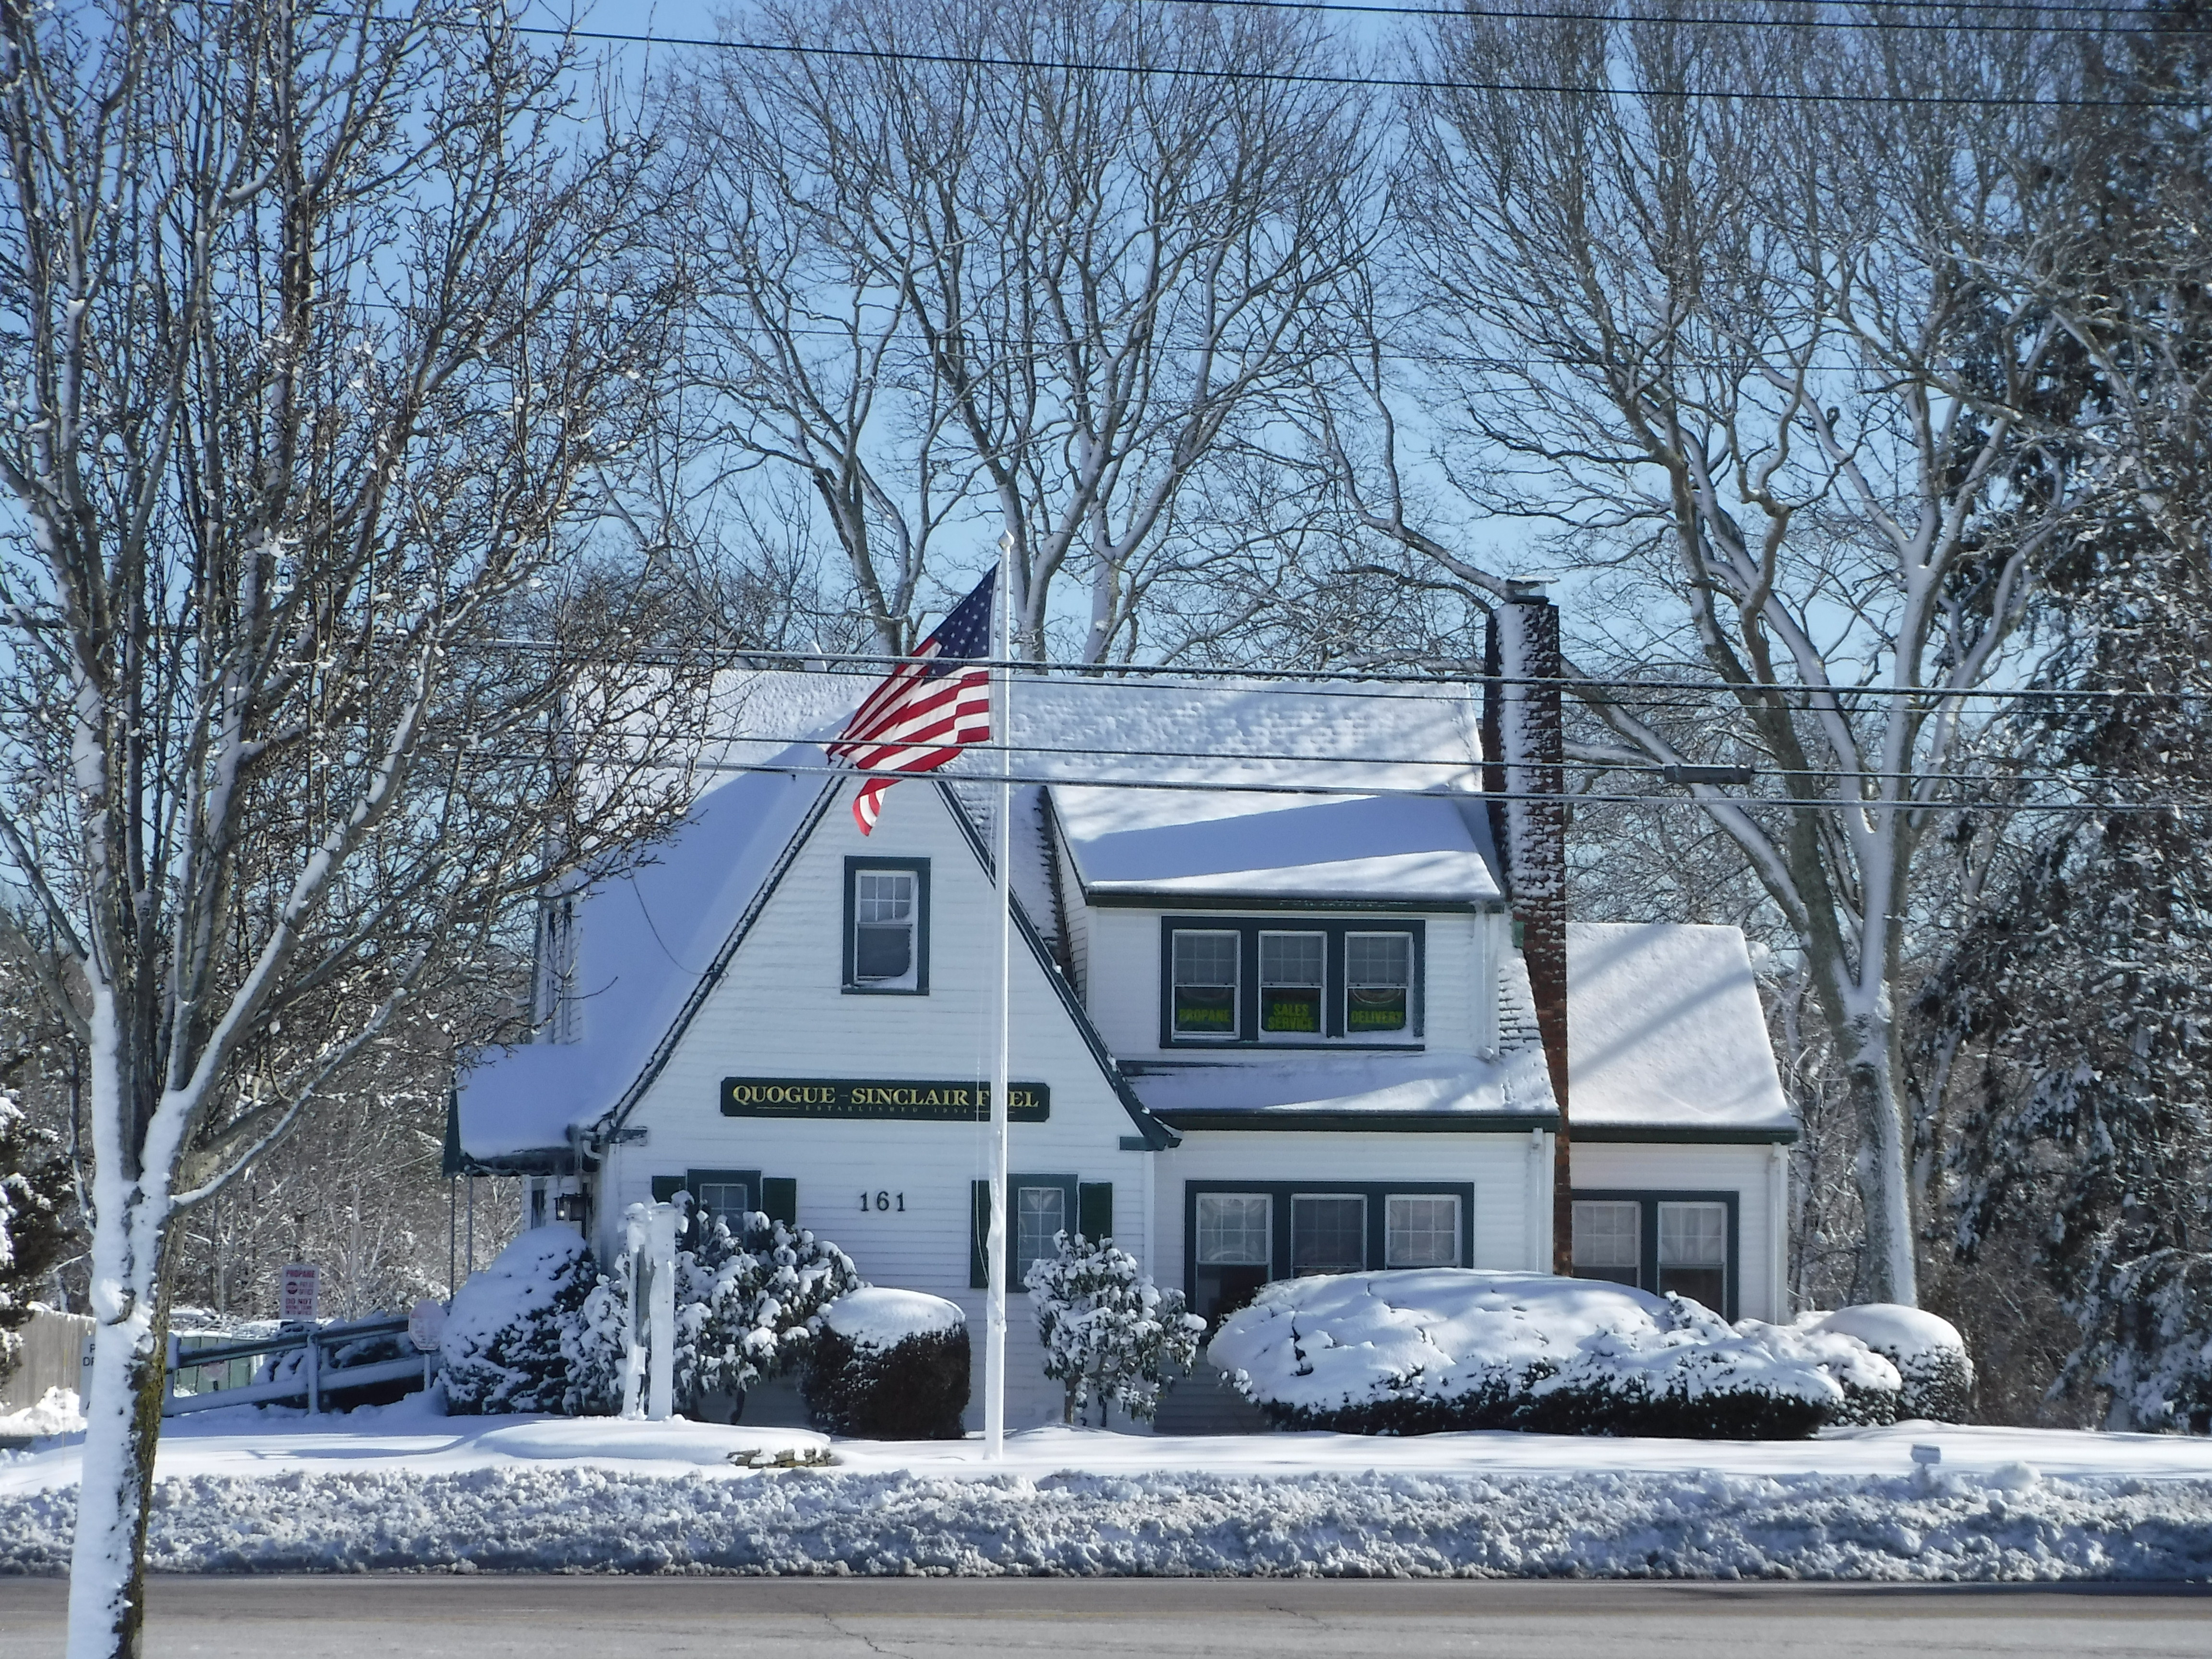 Photograph of the Quogue Sinclair office in winter, covered with snow, by Brenda Sinclair